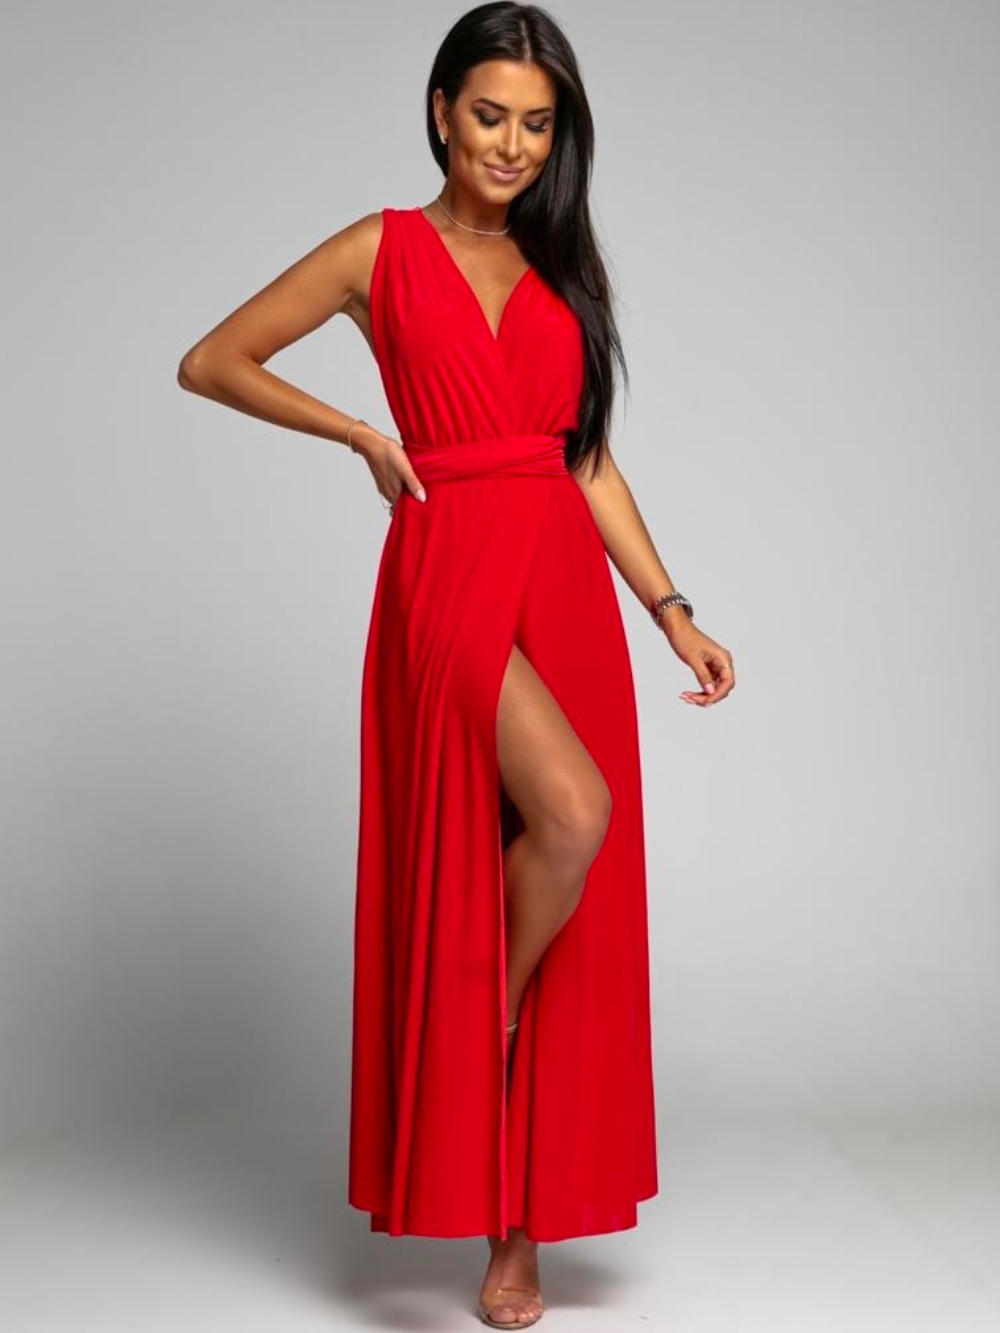 Elegant red maxi dress with ties